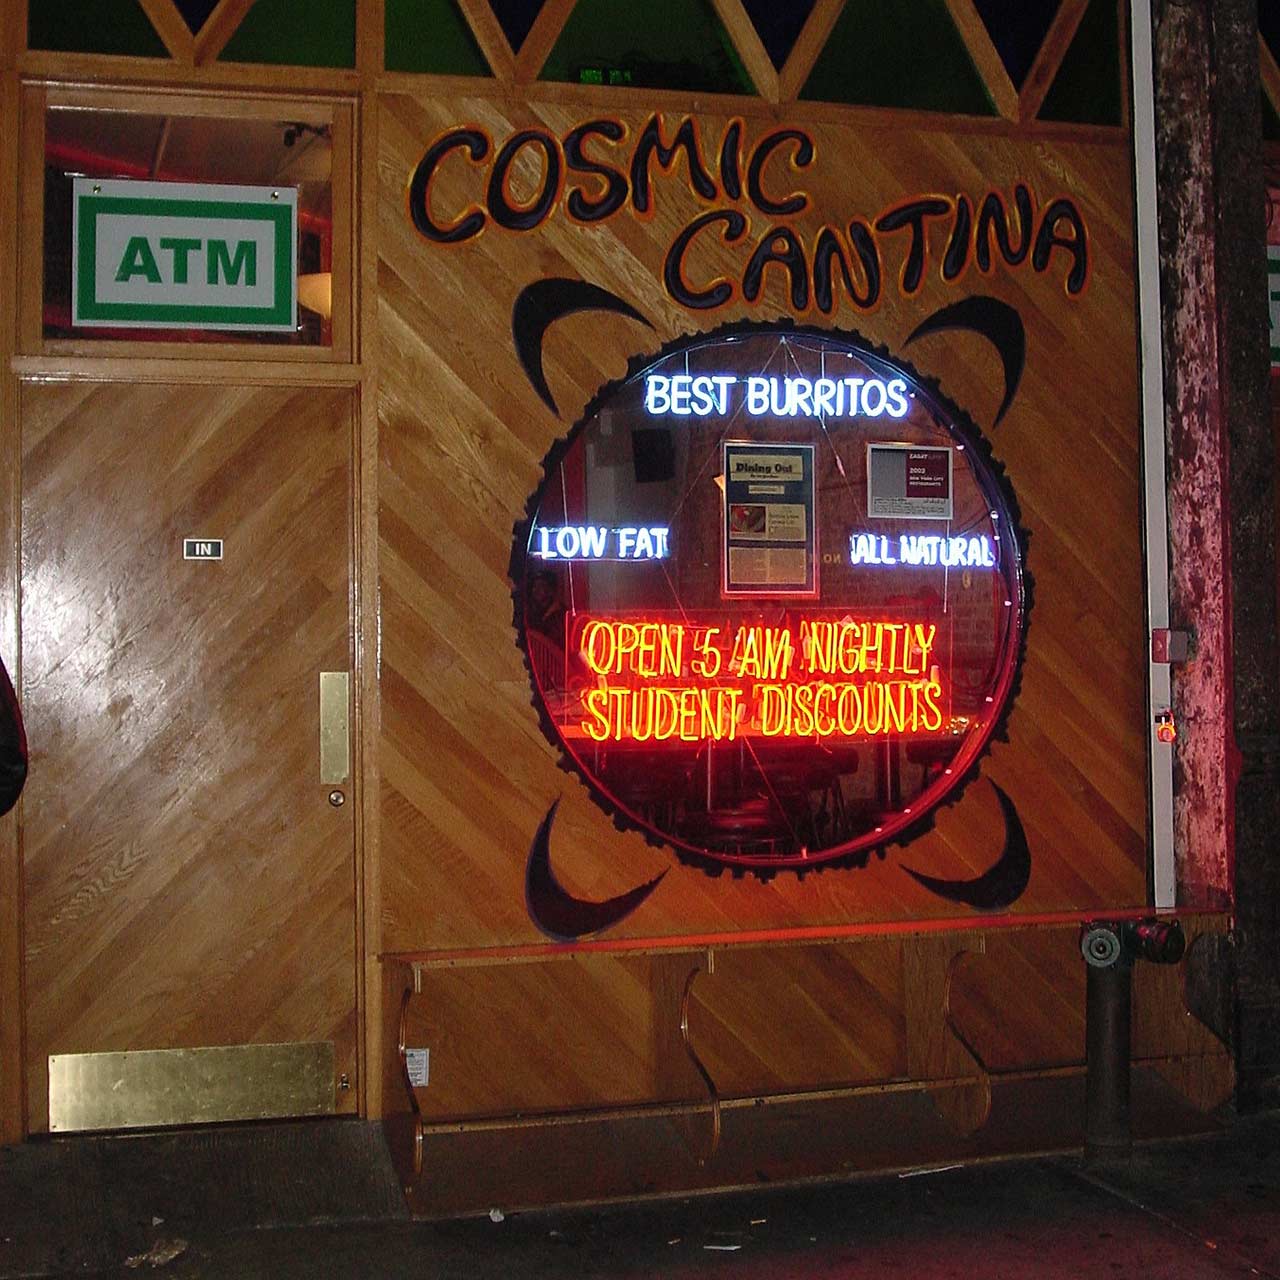 Cosmic Cantina sign pained on wood, with a round window.